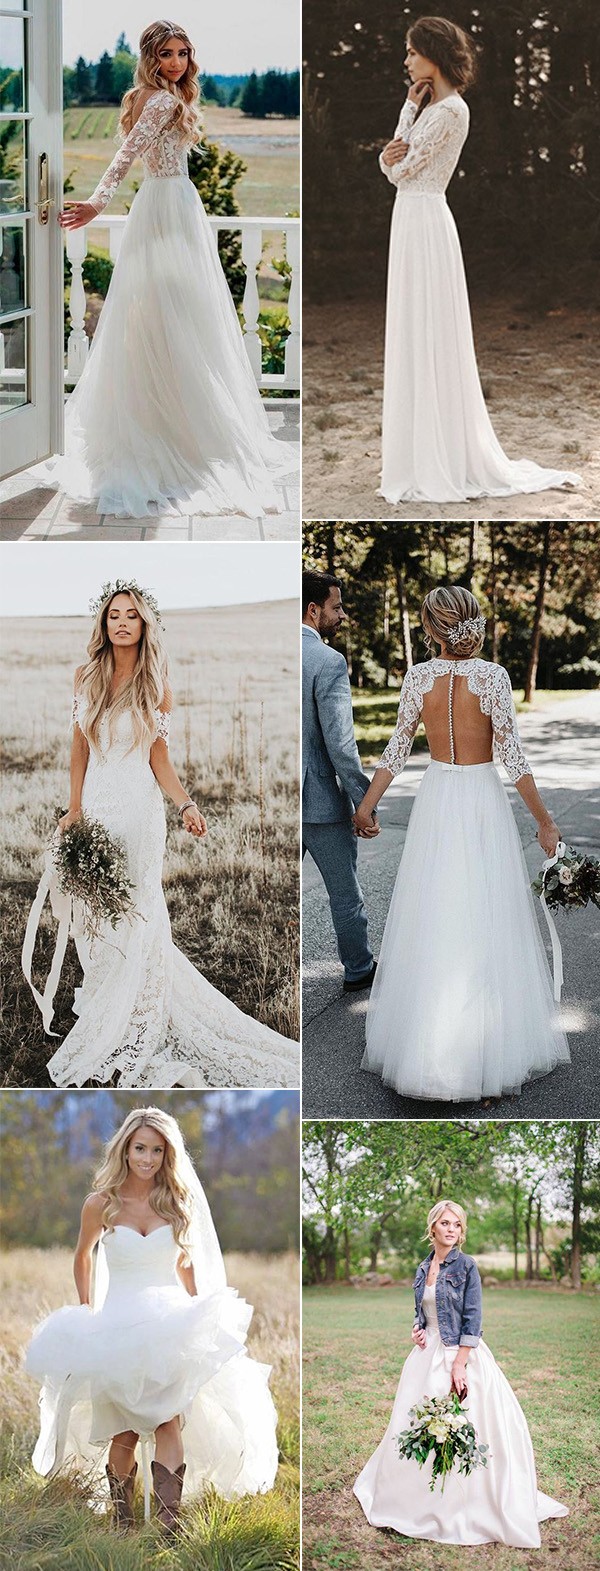 Classic and beautiful to bohemian and whimsical are just a few of the many styles of country wedding dresses.